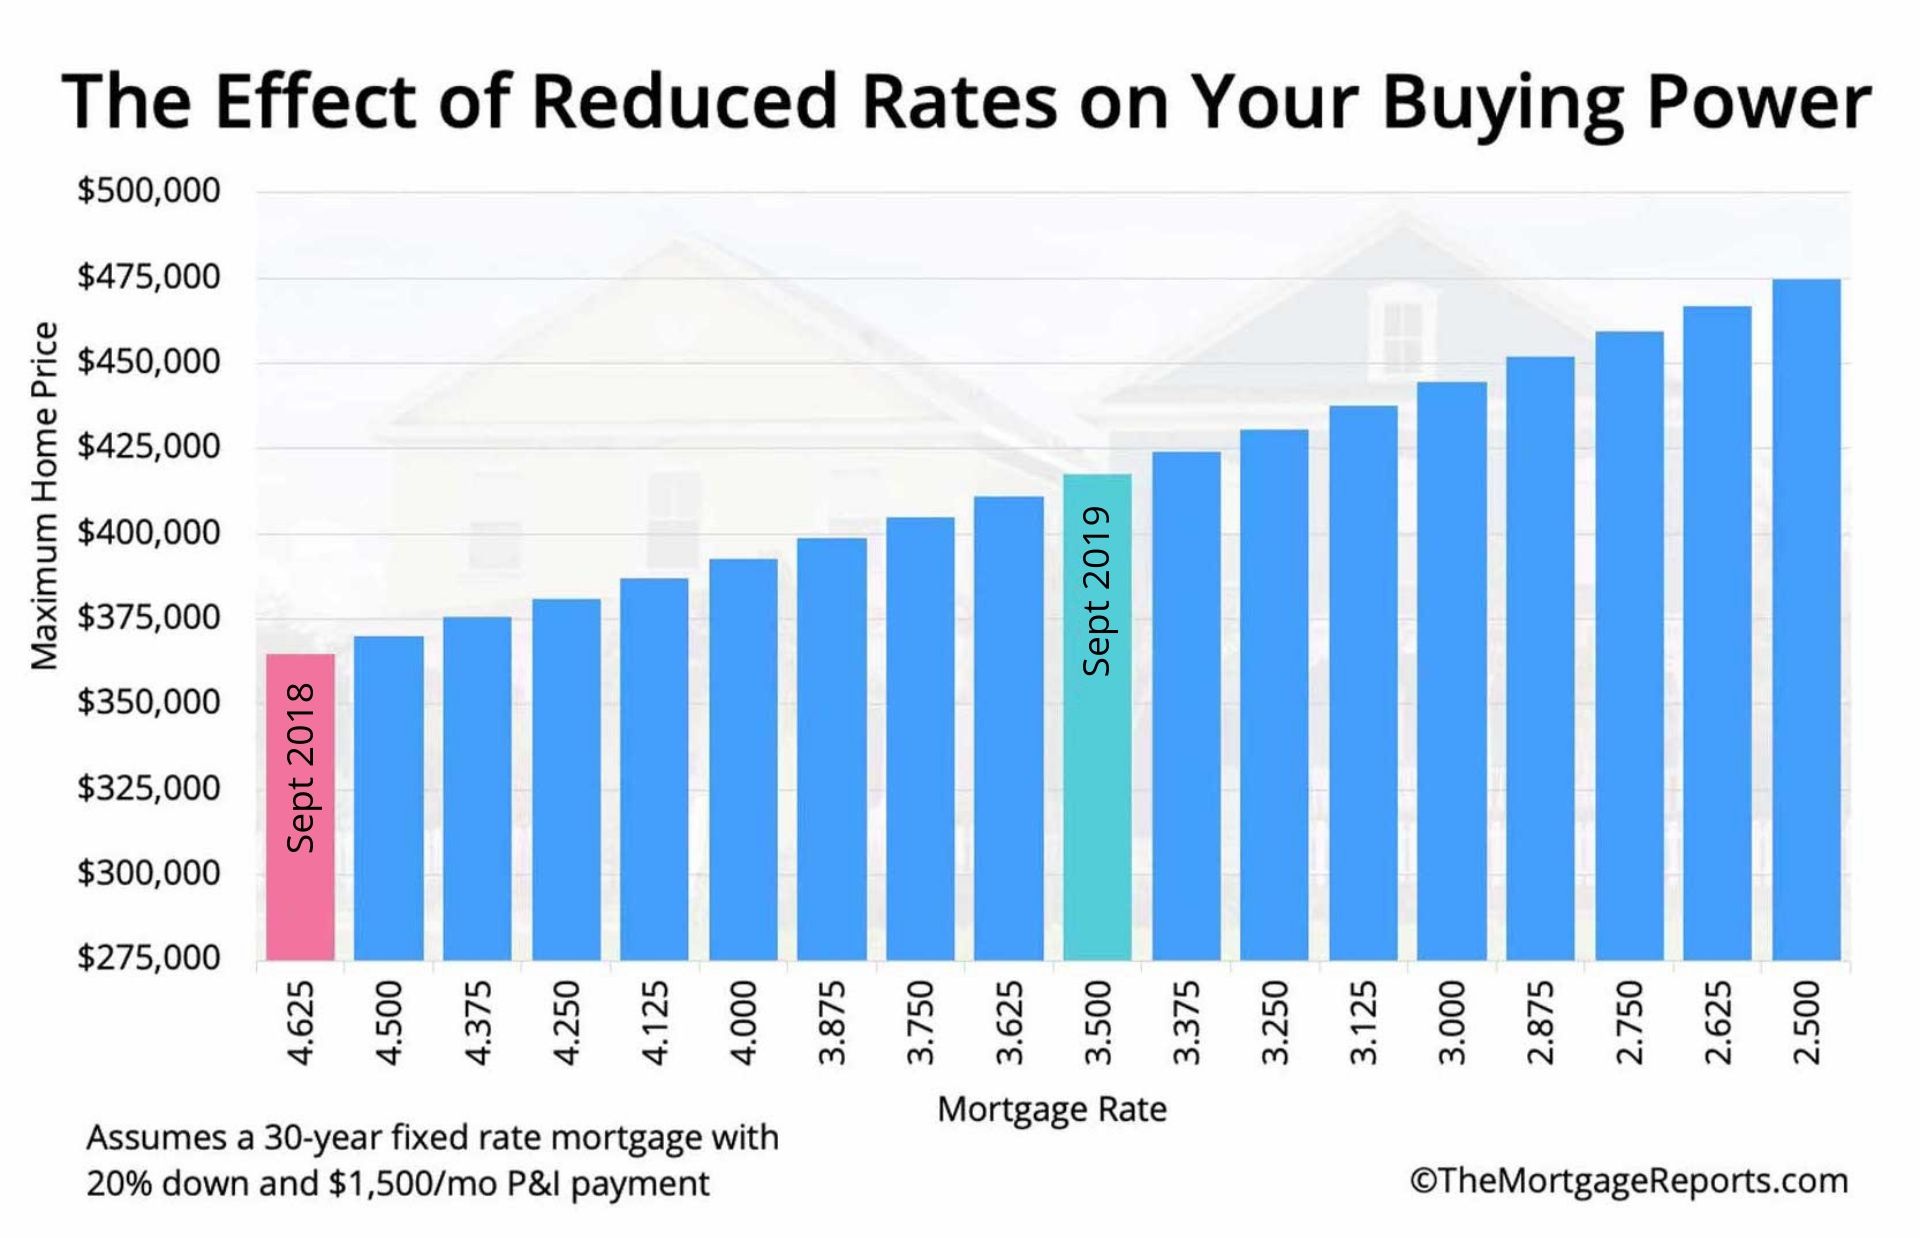 Low Mortgage Rates Help Buyers Afford More